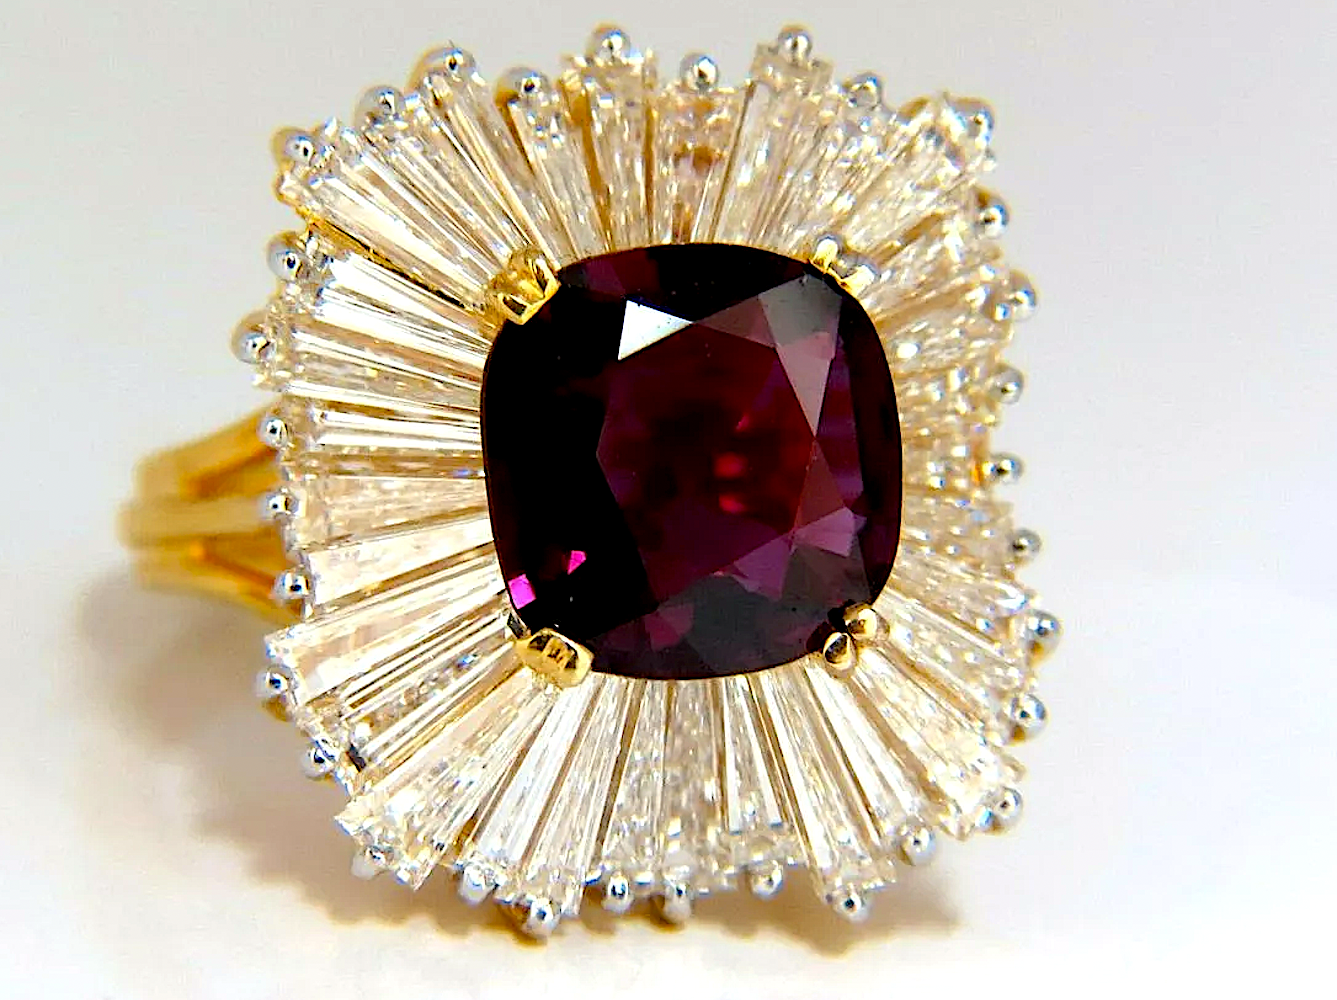 GIA-certified 3.08-carat ruby set in an 18K gold ring with diamonds, est. $24,000-$29,000